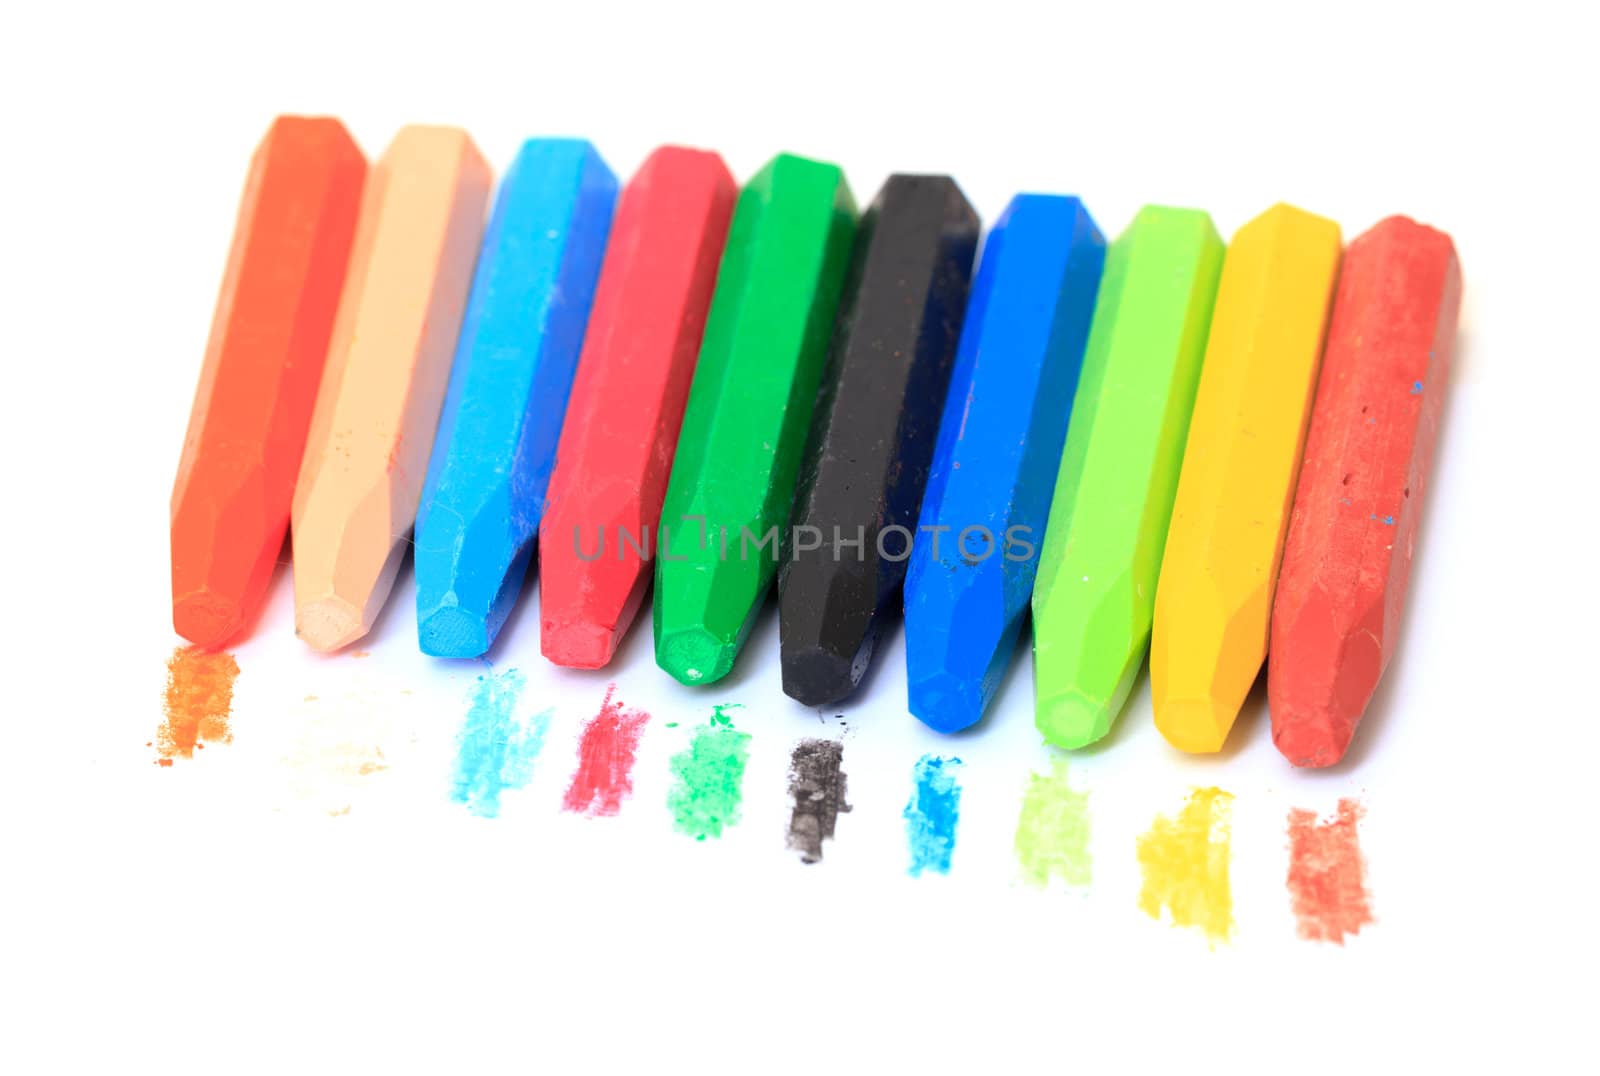 Group of Crayons stacked on white background